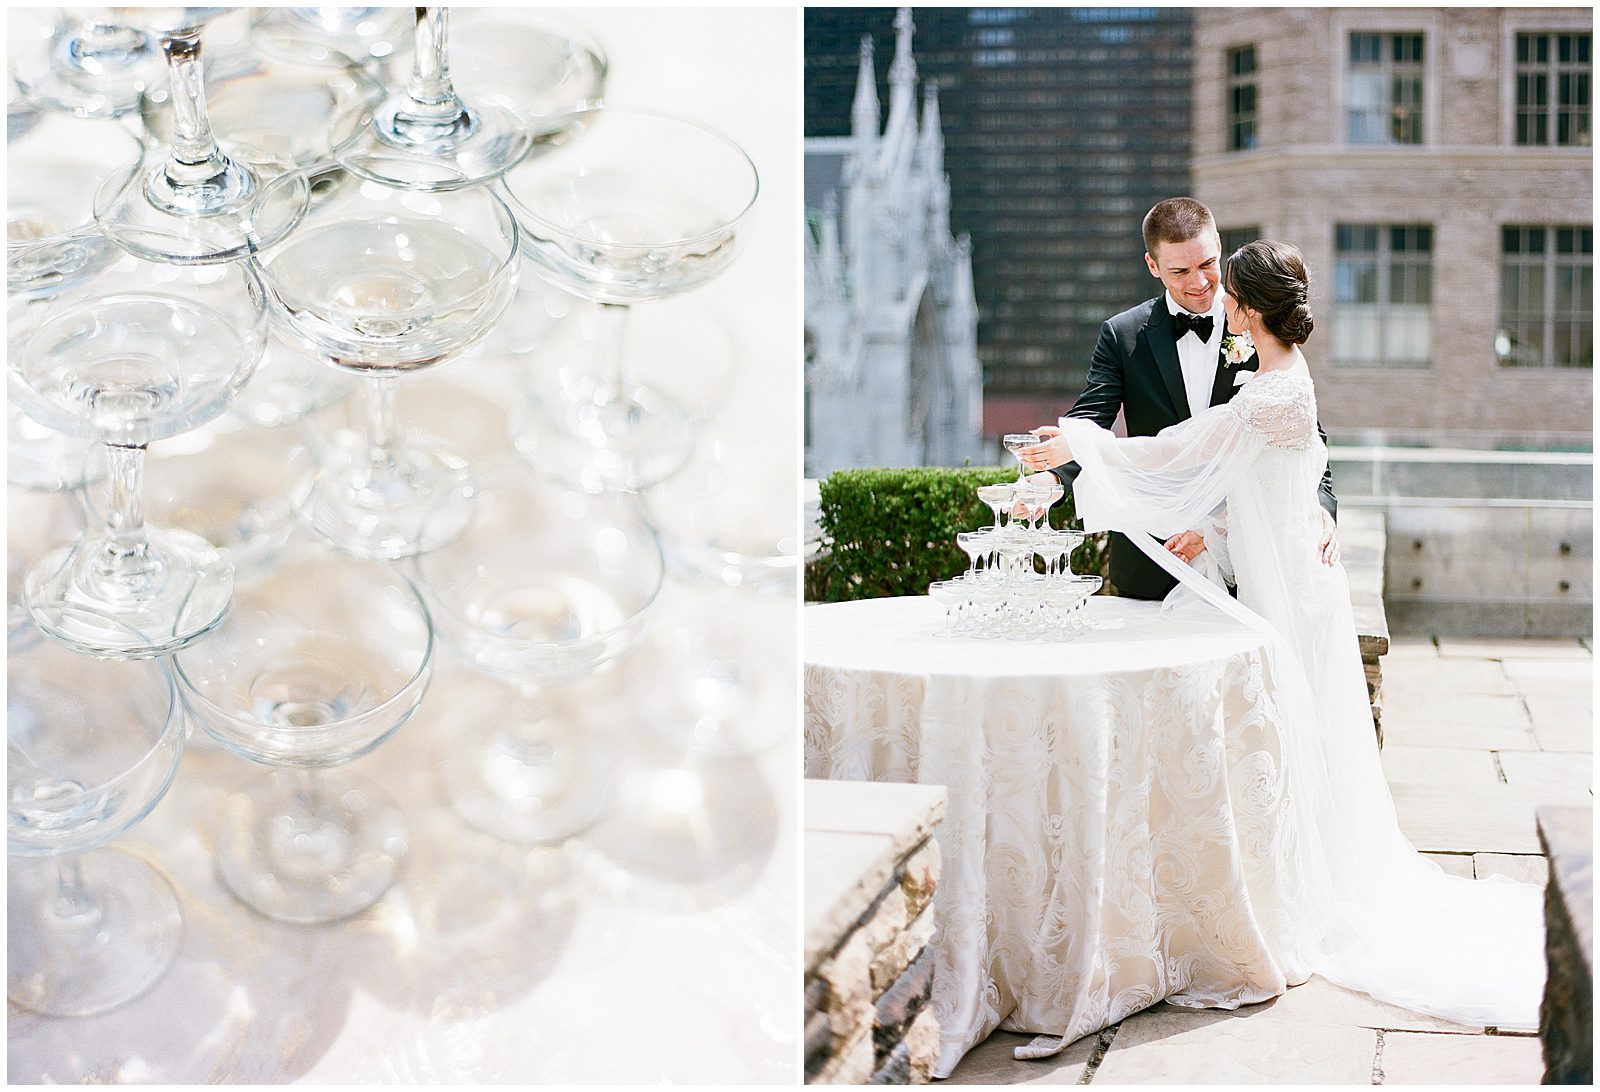 New York City Wedding Venue 620 Loft and Garden Champagne Tower With Bride and Groom Photos